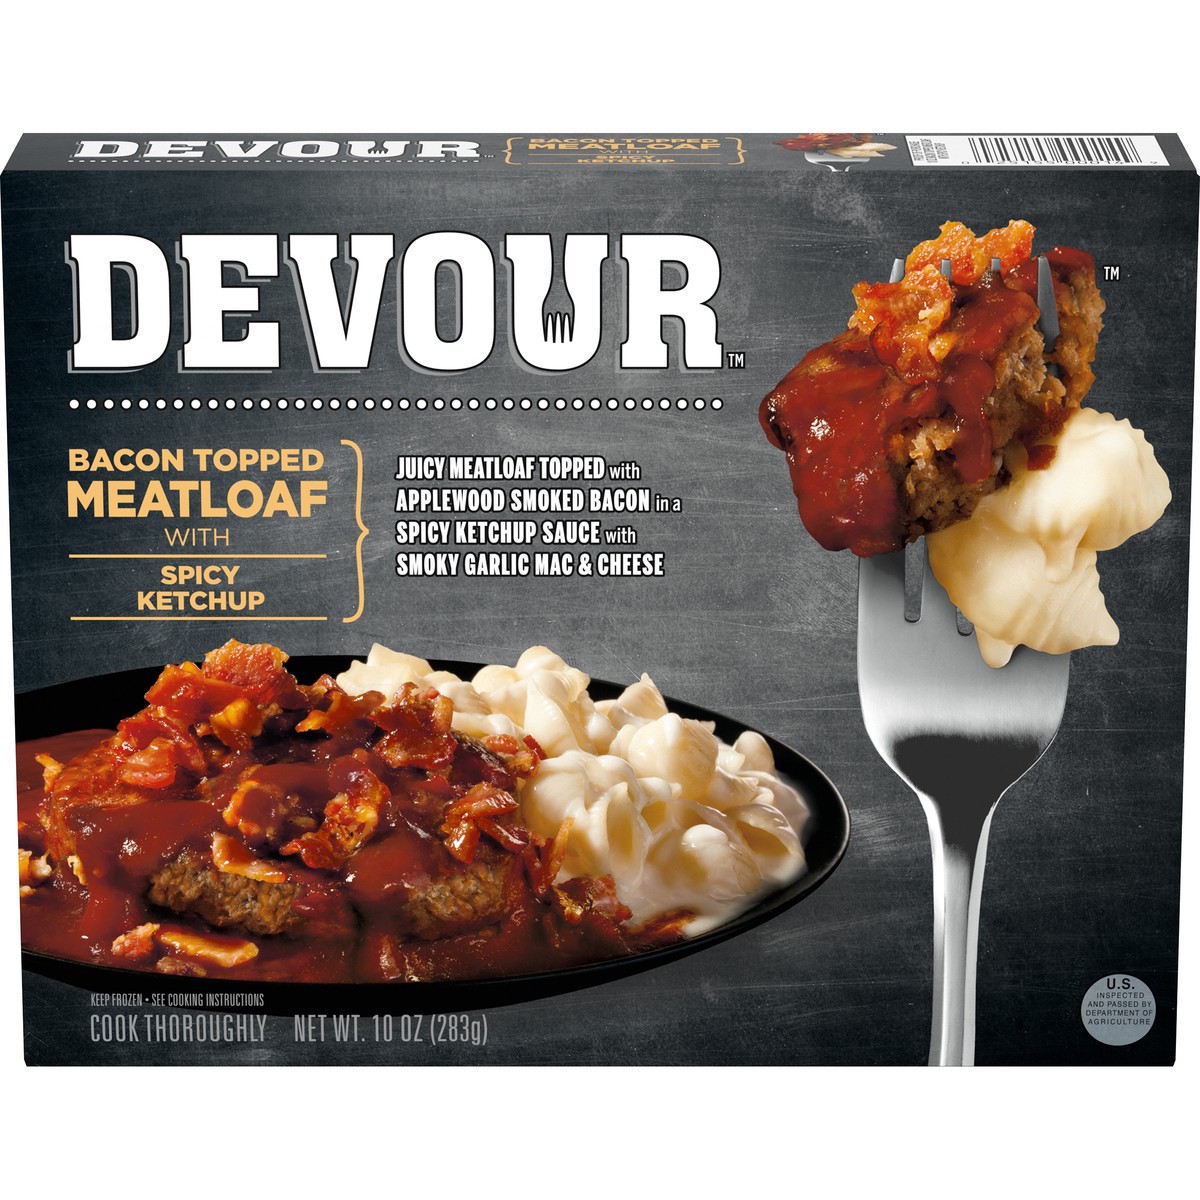 slide 1 of 11, DEVOUR Bacon Topped Meatloaf with Spicy Ketchup 10 oz. Box, 10 oz